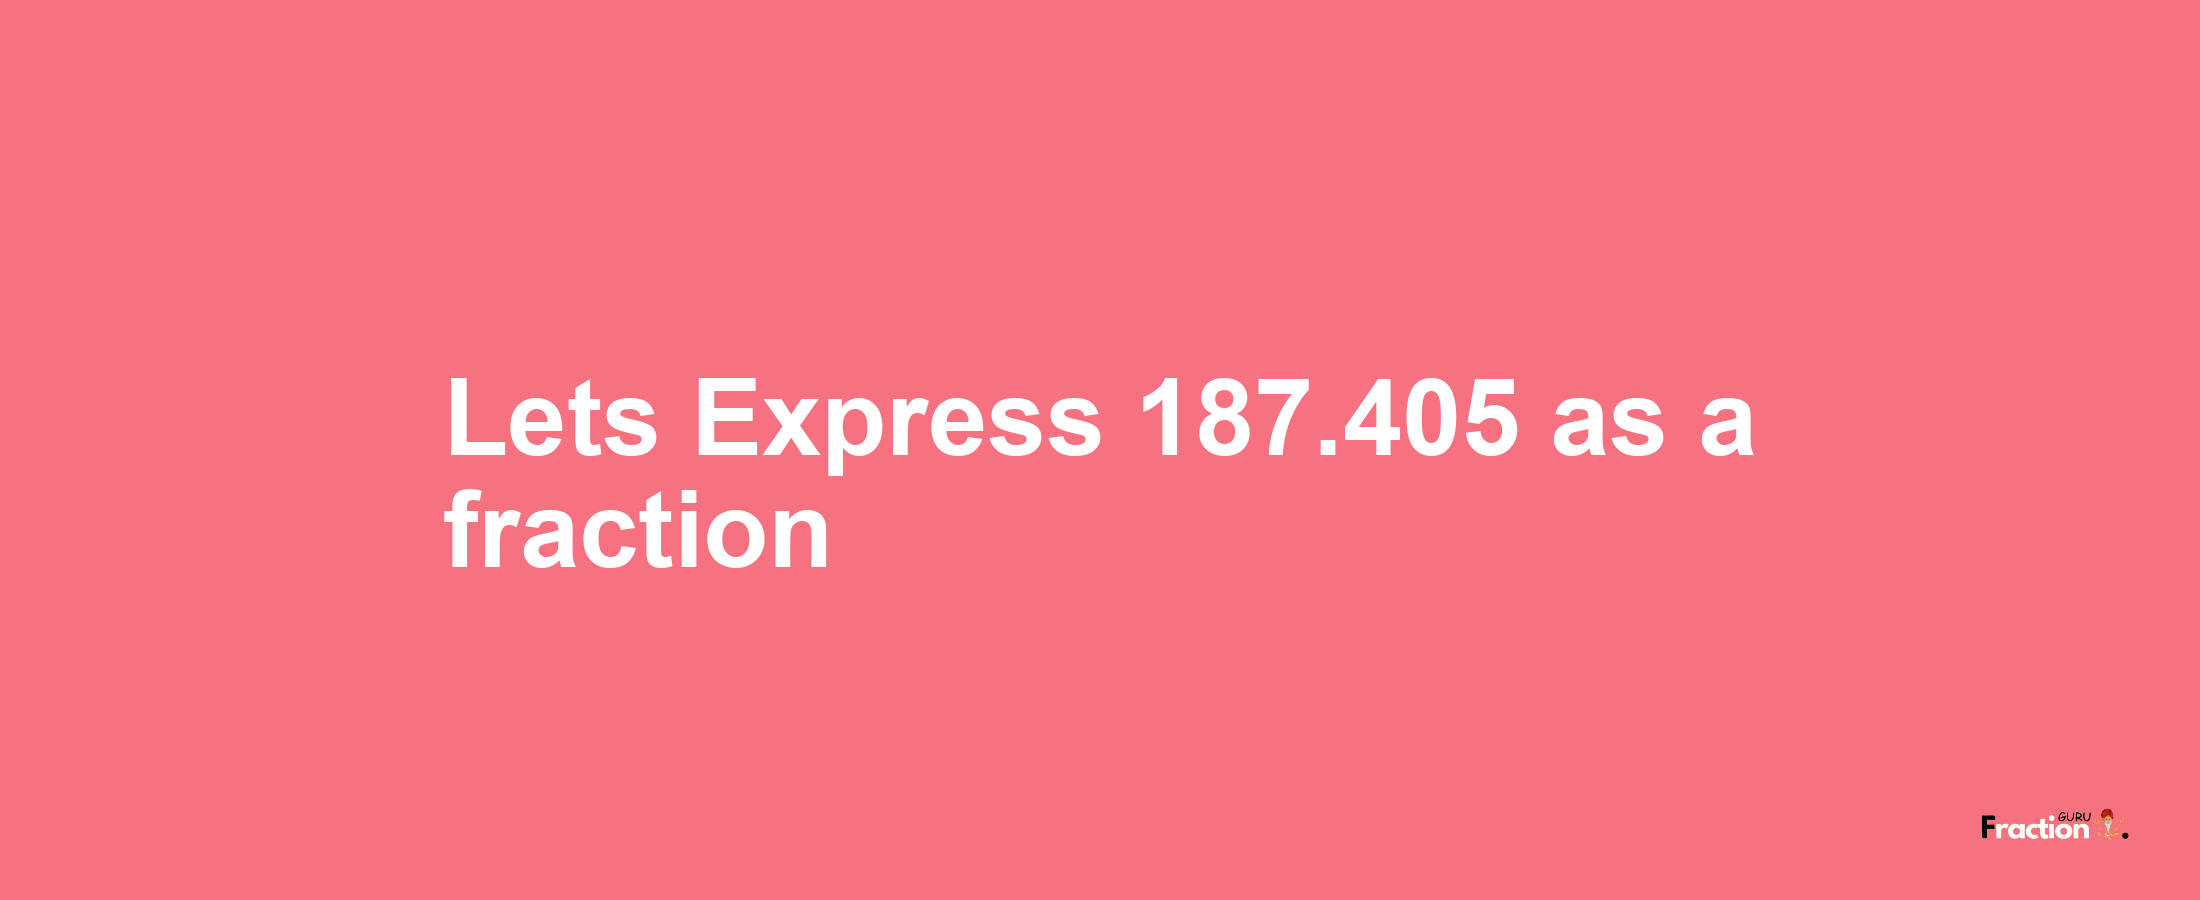 Lets Express 187.405 as afraction